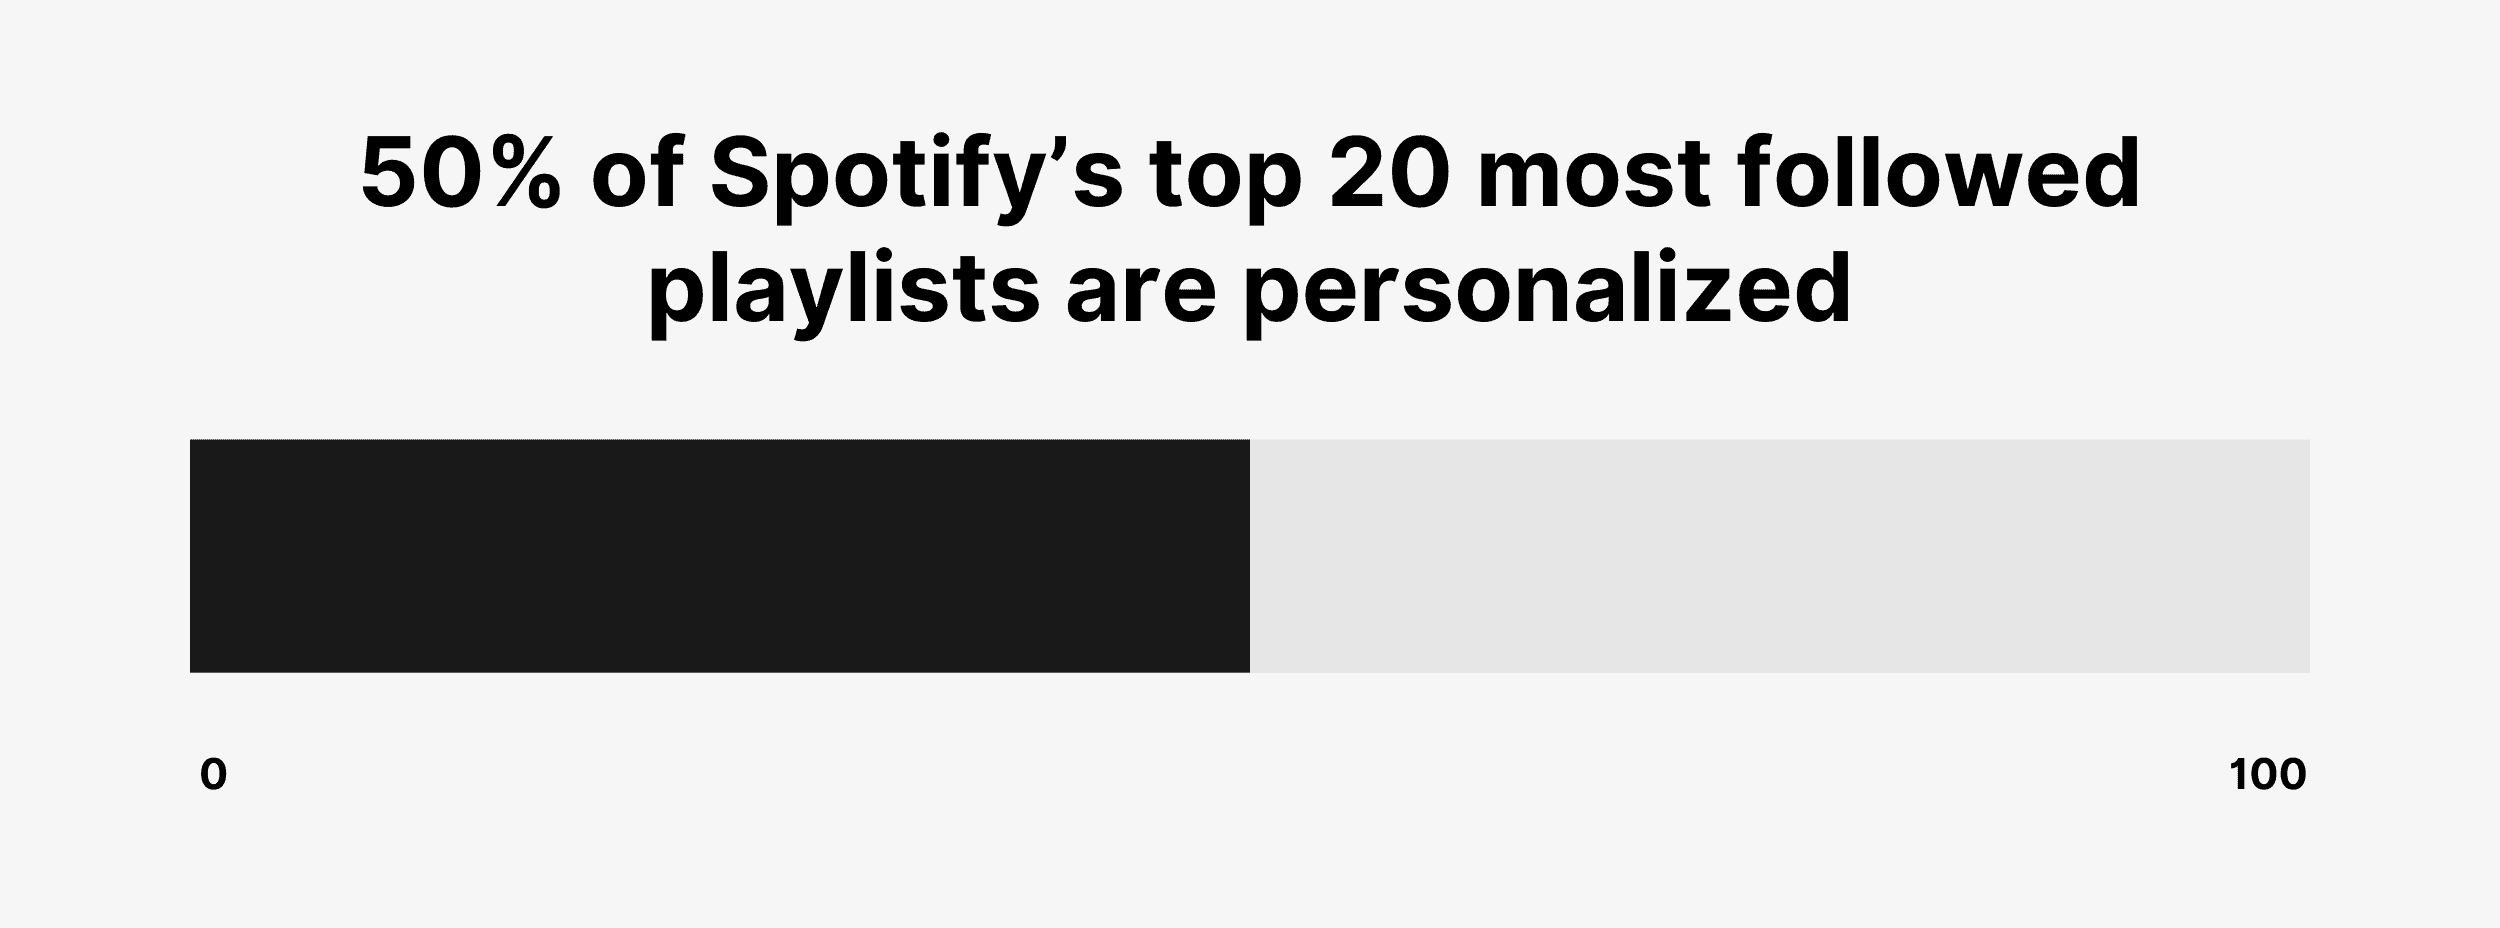 50% of Spotify’s top 20 most followed playlists are personalized